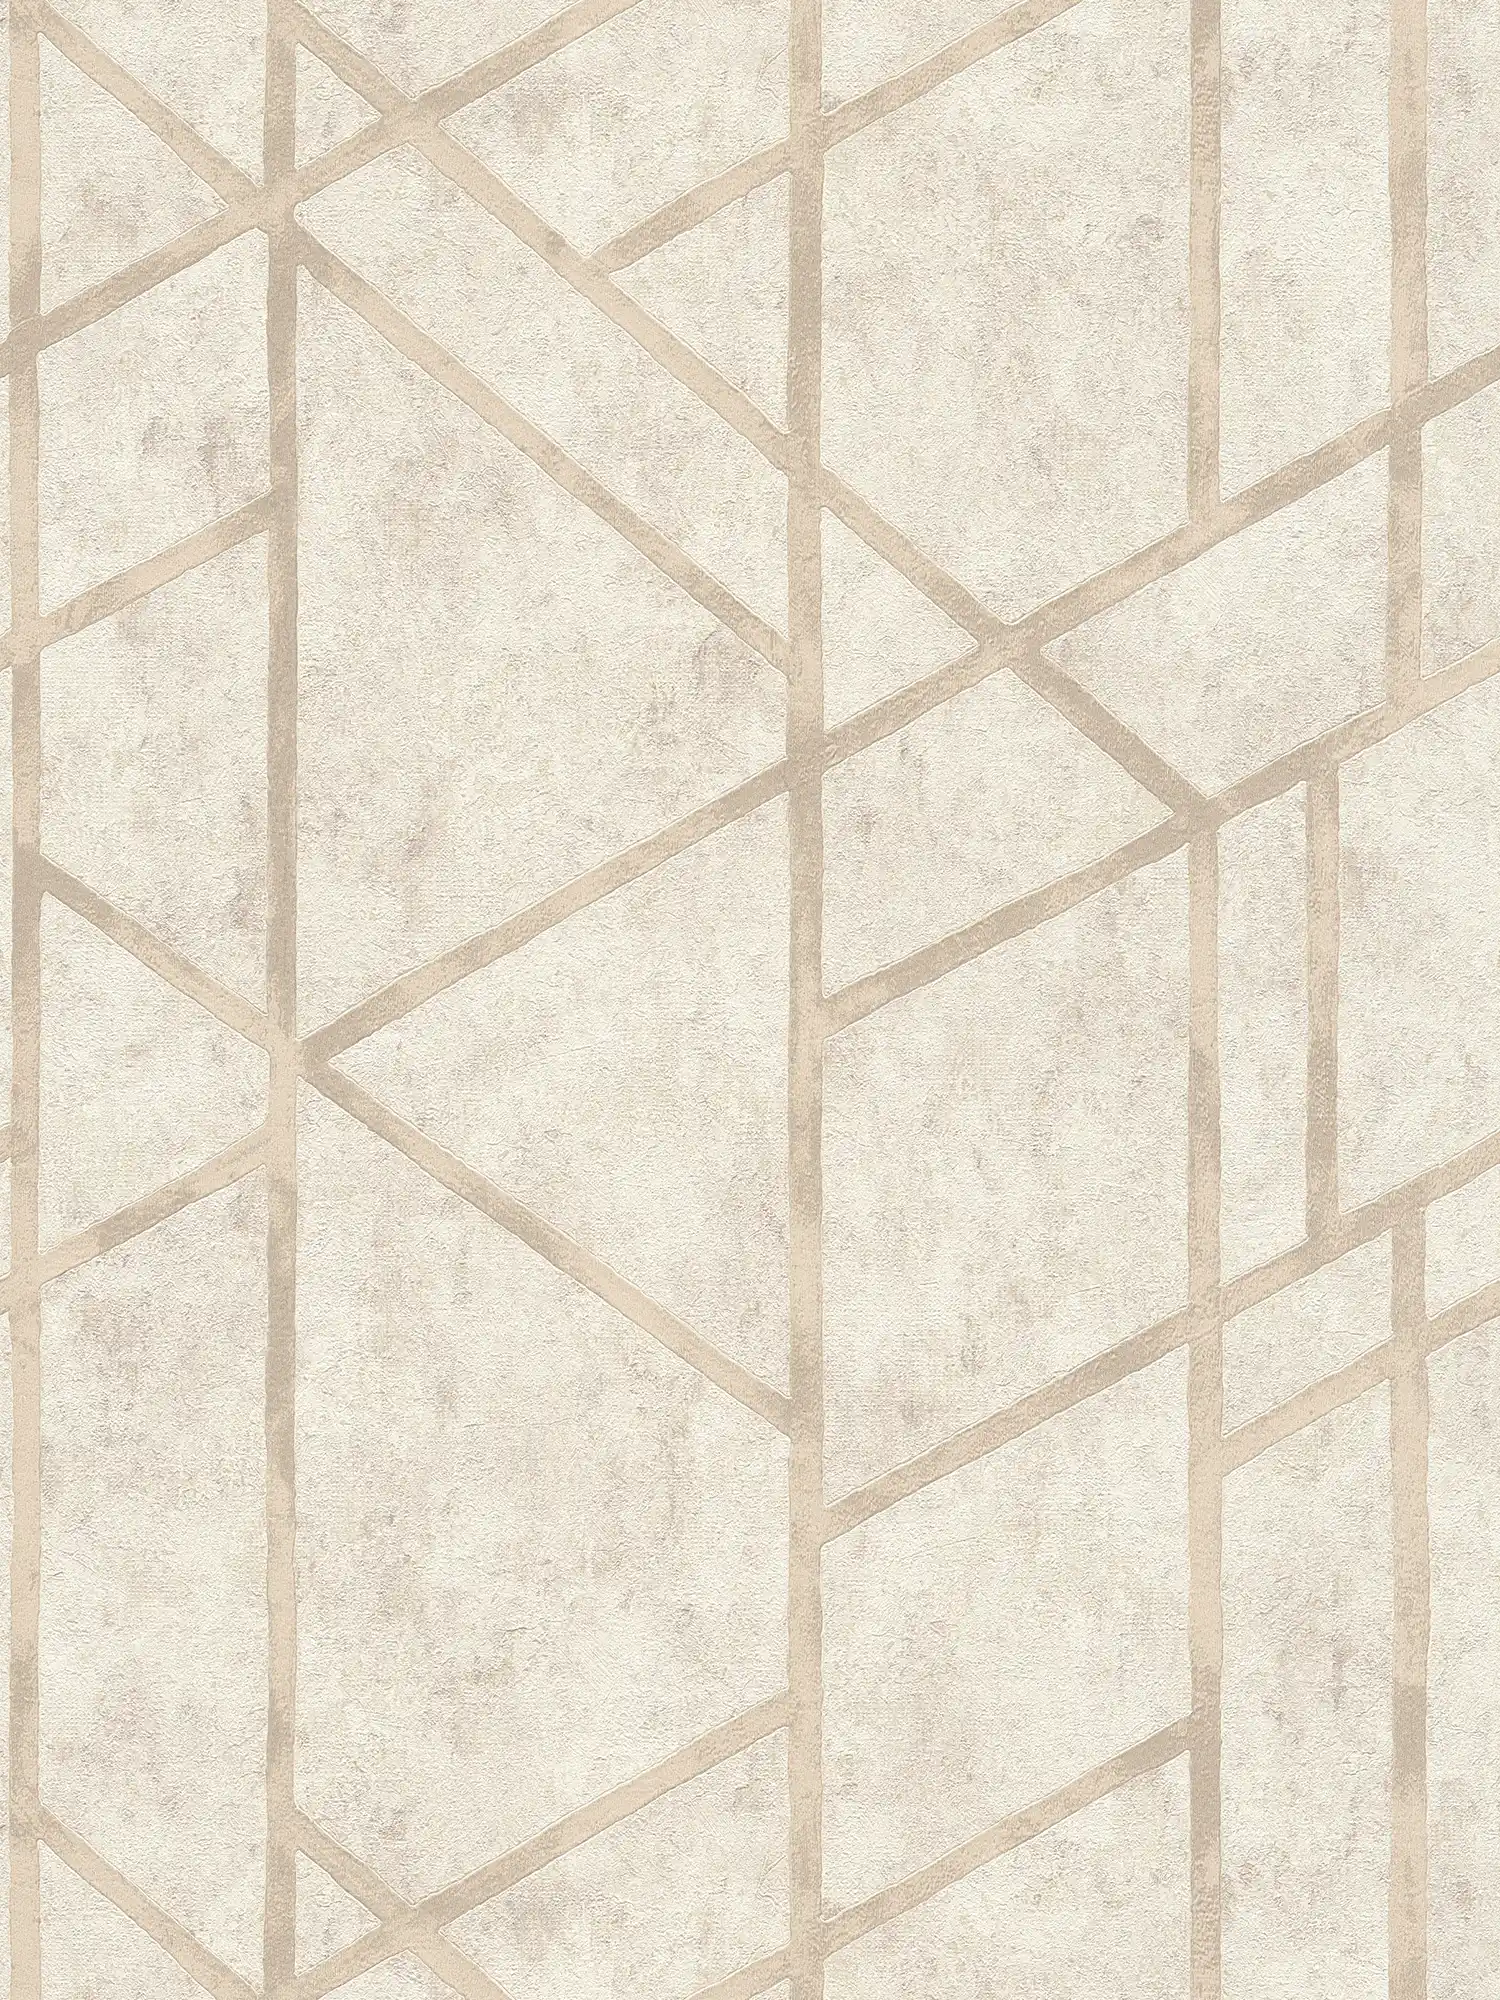 Concrete wallpaper with golden lines pattern - cream
